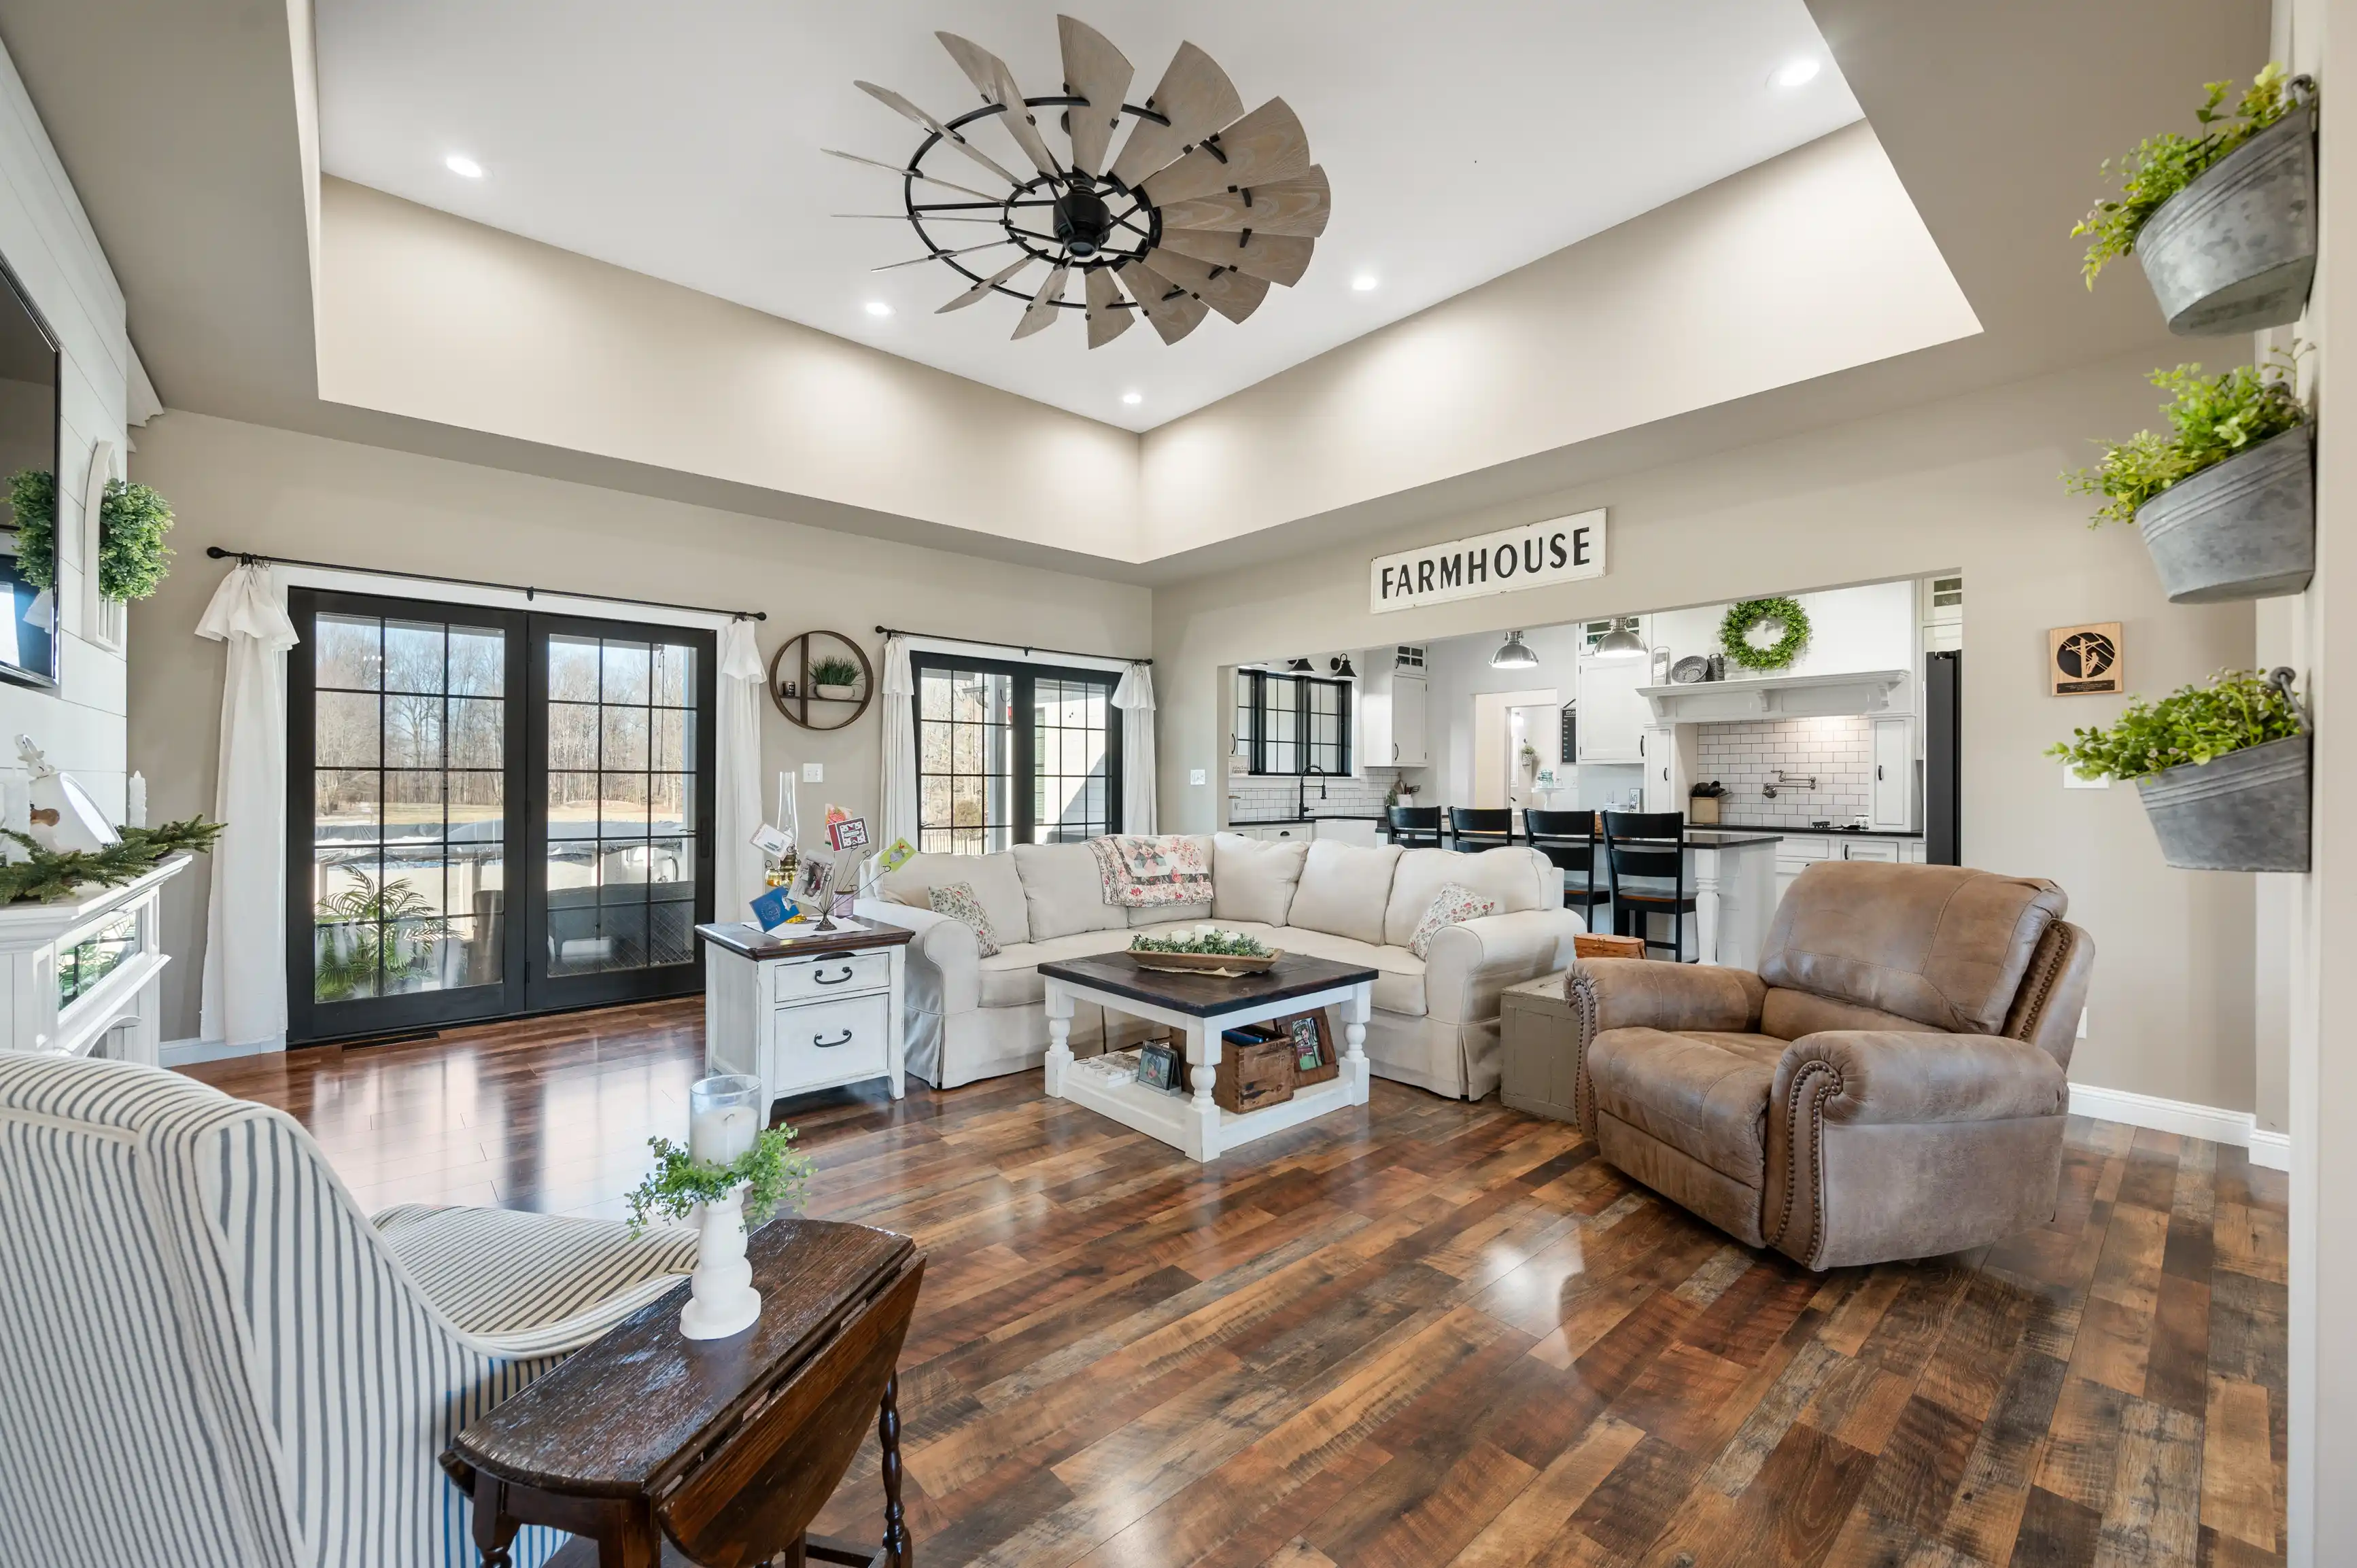 Bright and airy open-concept living room with farmhouse-style decor, vaulted ceiling and hardwood floors, leading into a kitchen with black accents.